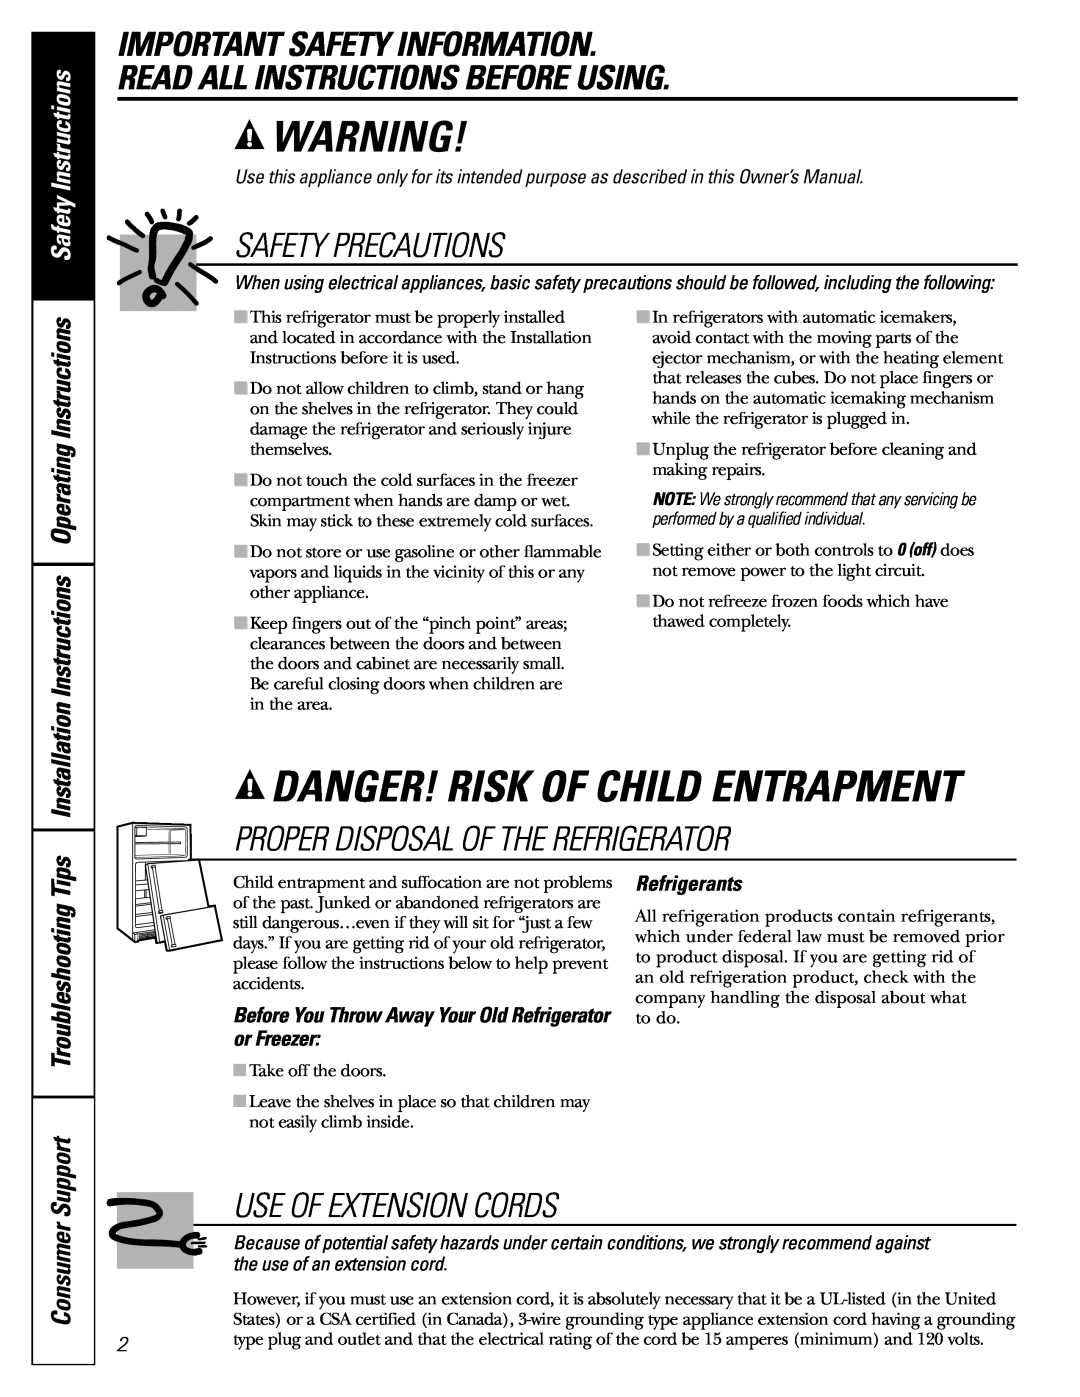 GE Monogram 22 Danger! Risk Of Child Entrapment, Important Safety Information Read All Instructions Before Using, Consumer 